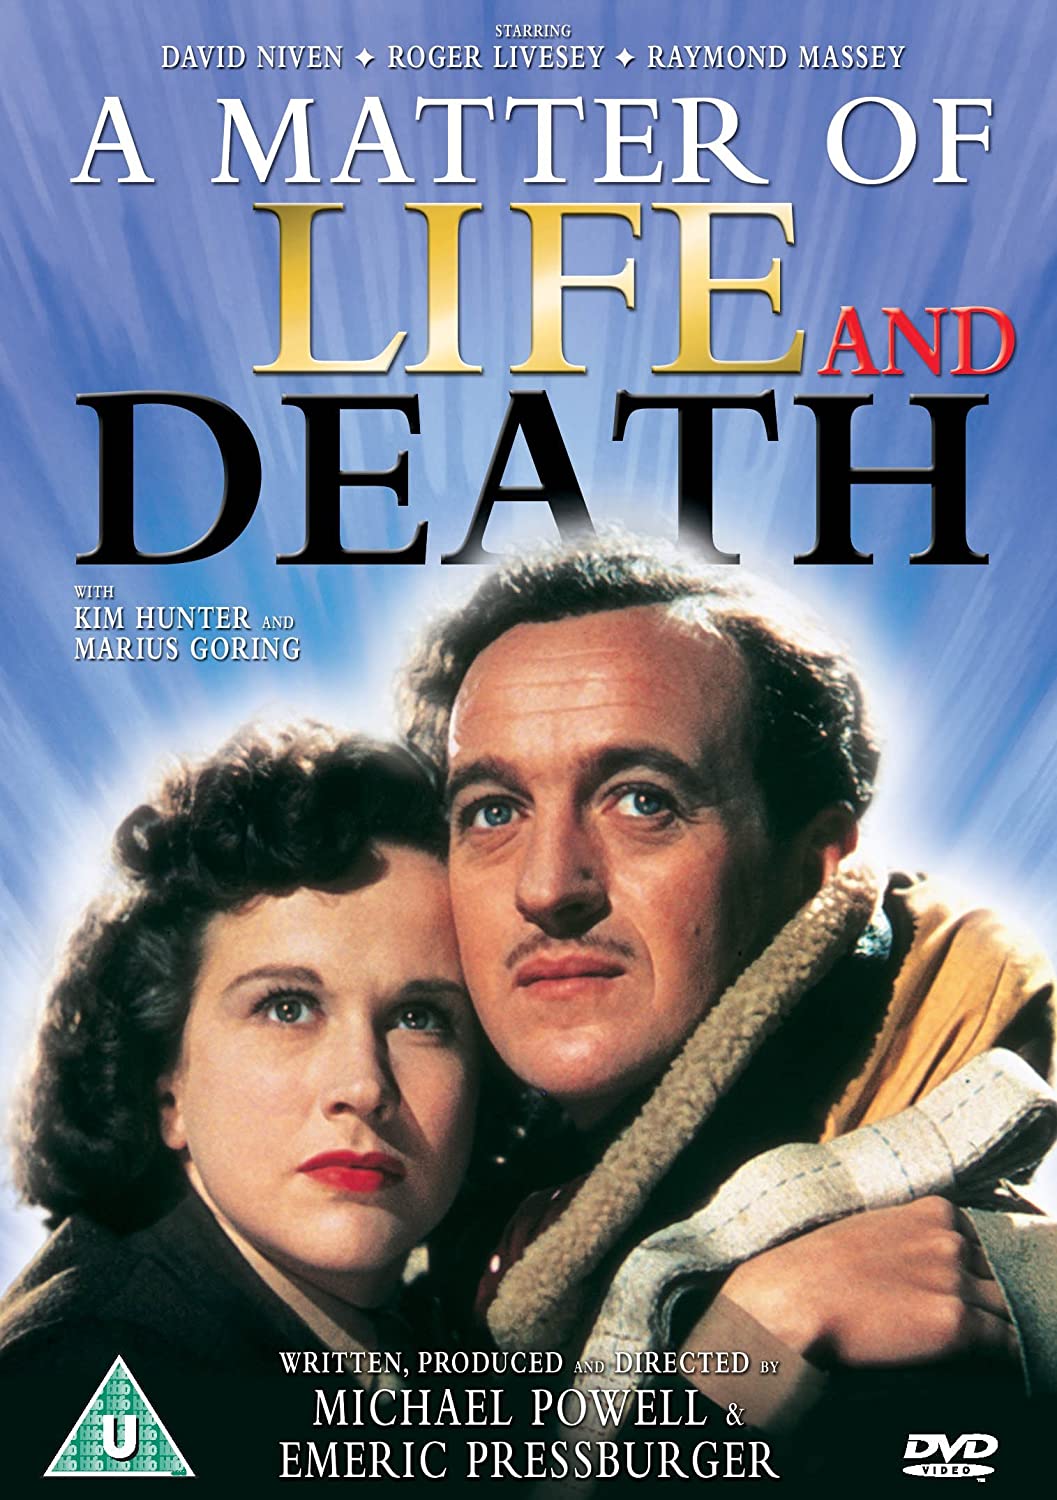 A Matter Of Life And Death - Romance/Fantasy [DVD]